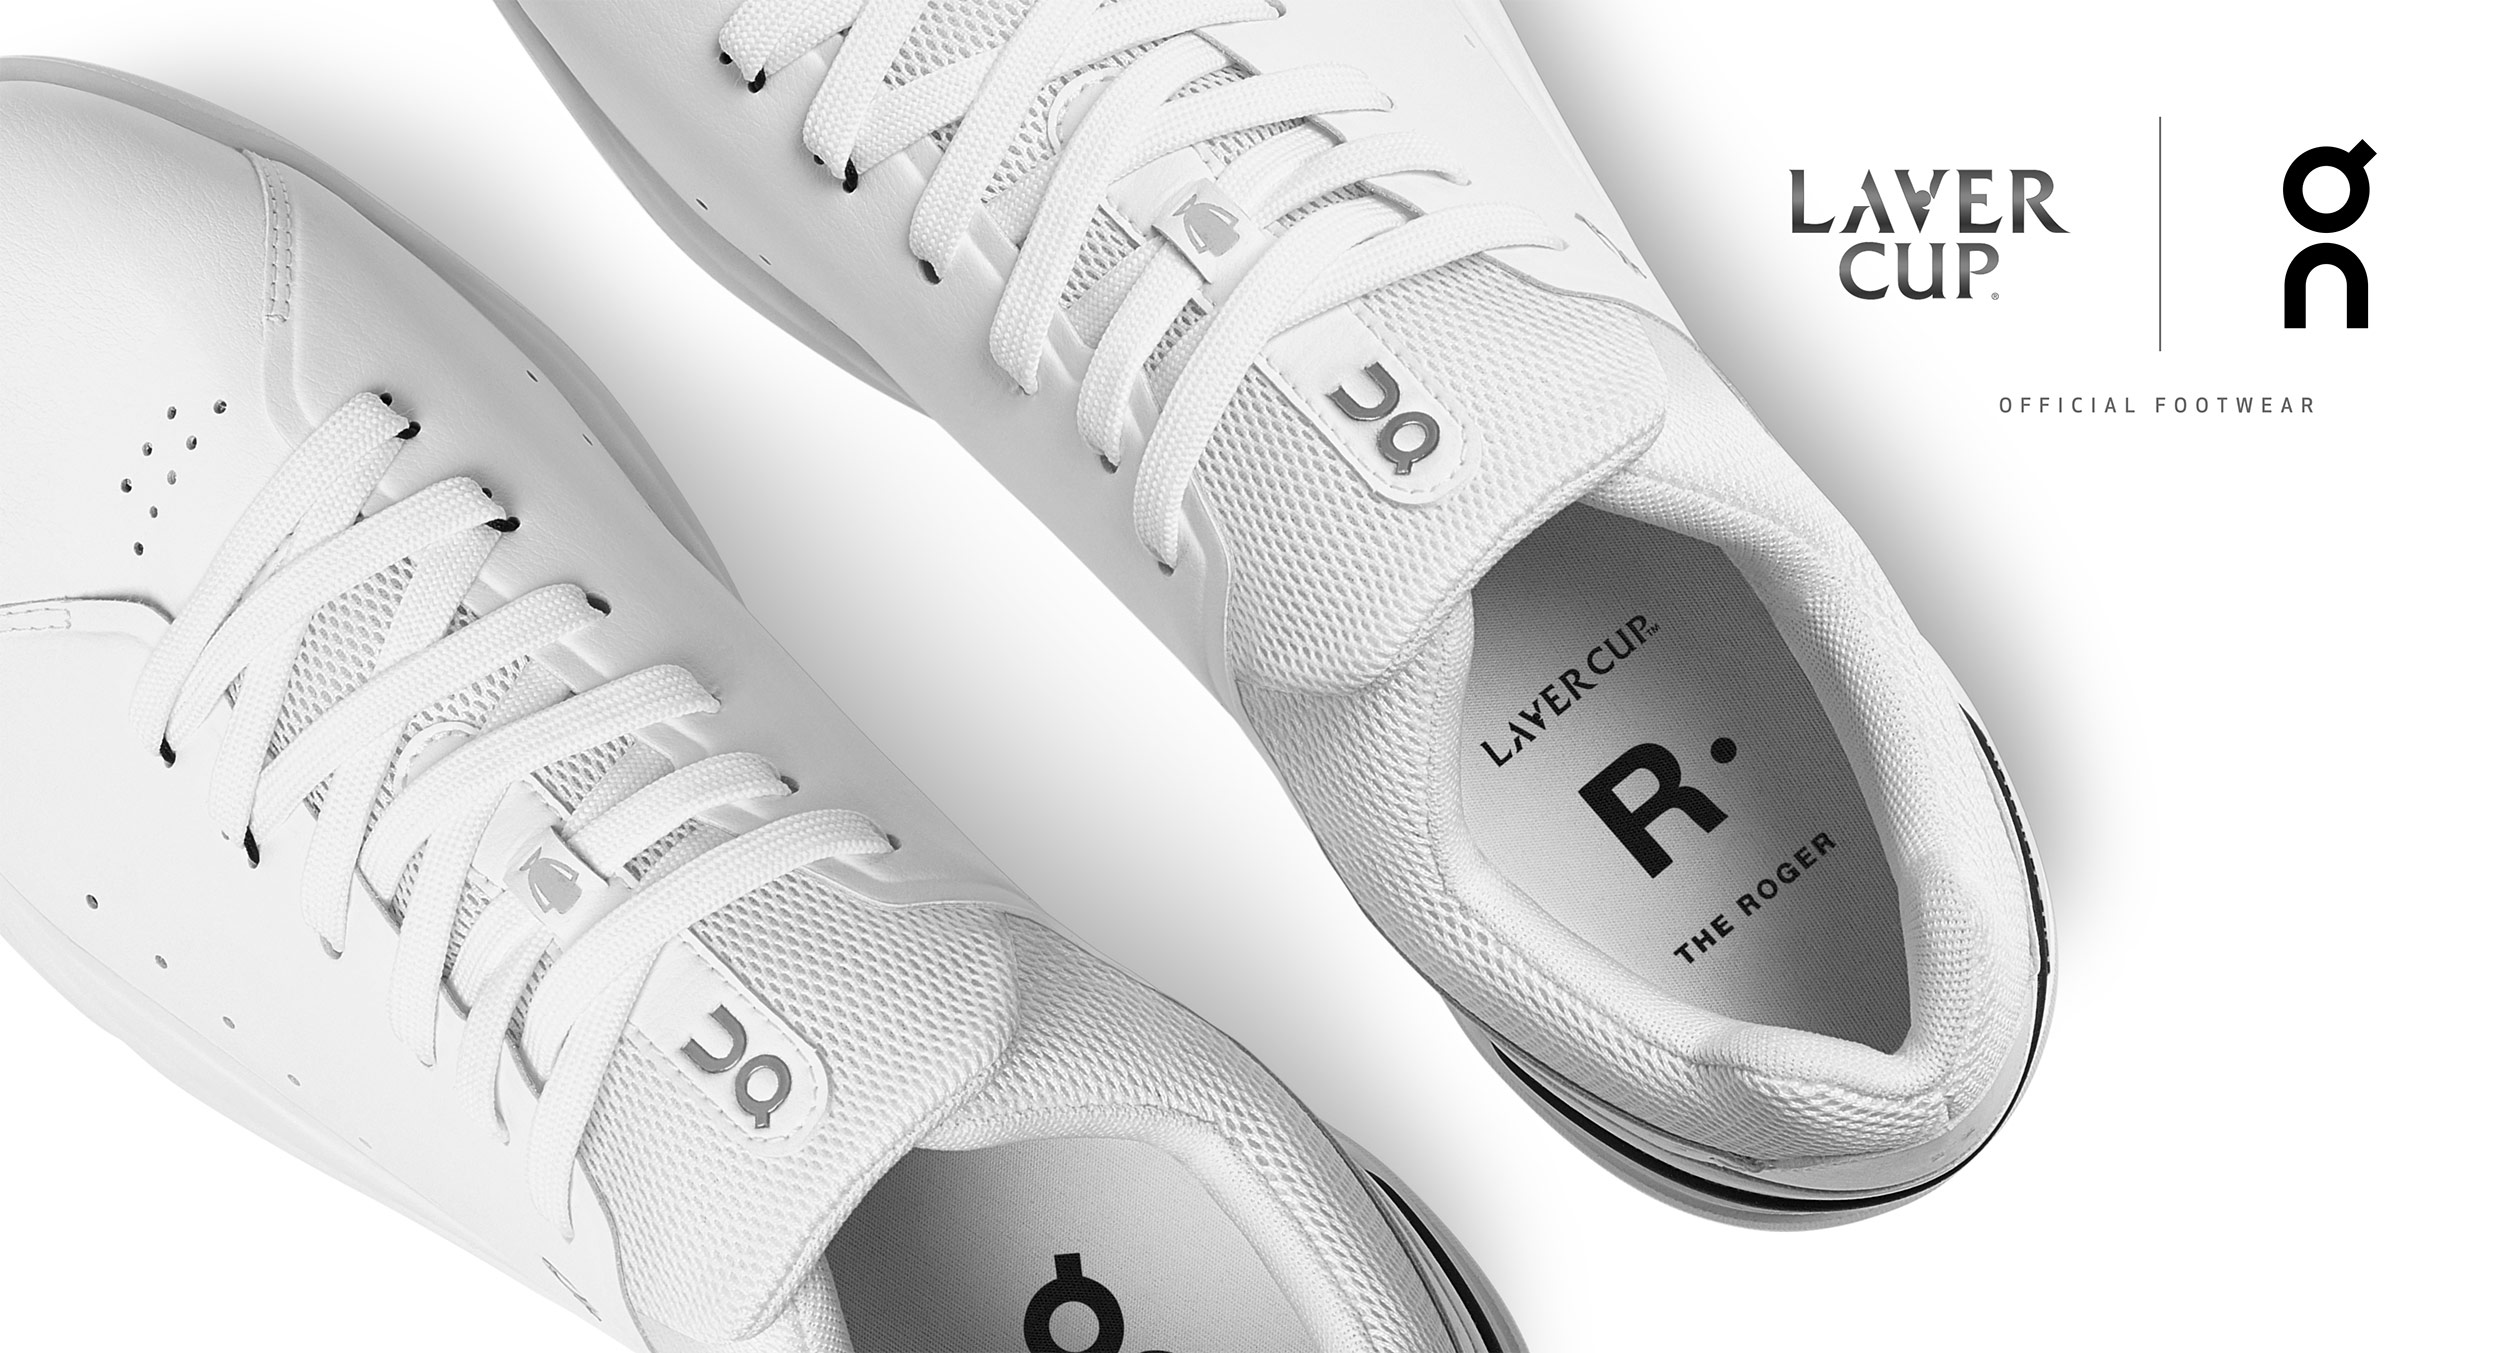 On announced as footwear sponsor News Laver Cup